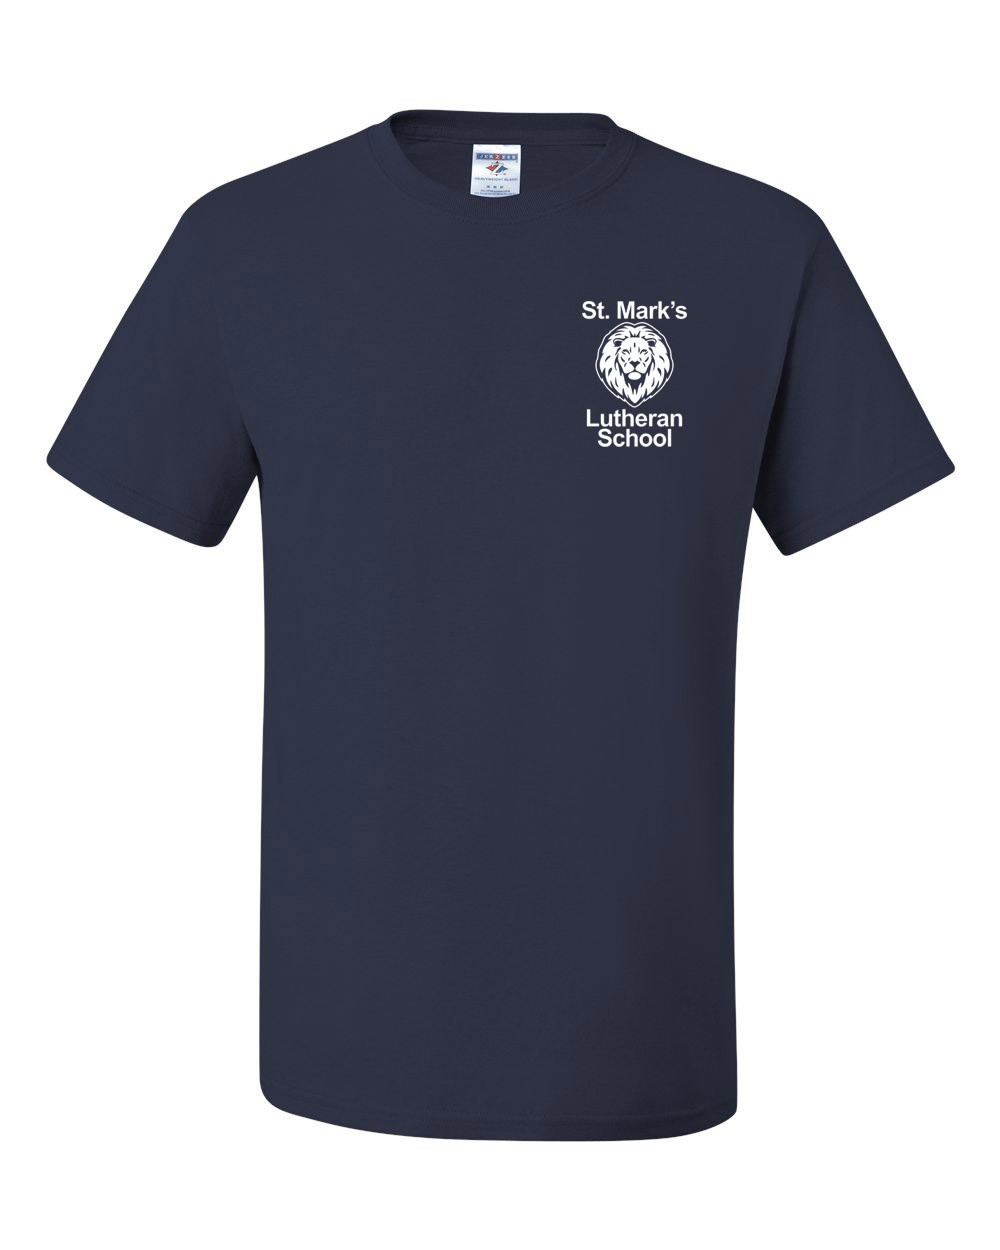 SMLS Staff Navy/Red Gym T-Shirt w/ School Logo - Please Allow 2-3 Weeks for Delivery